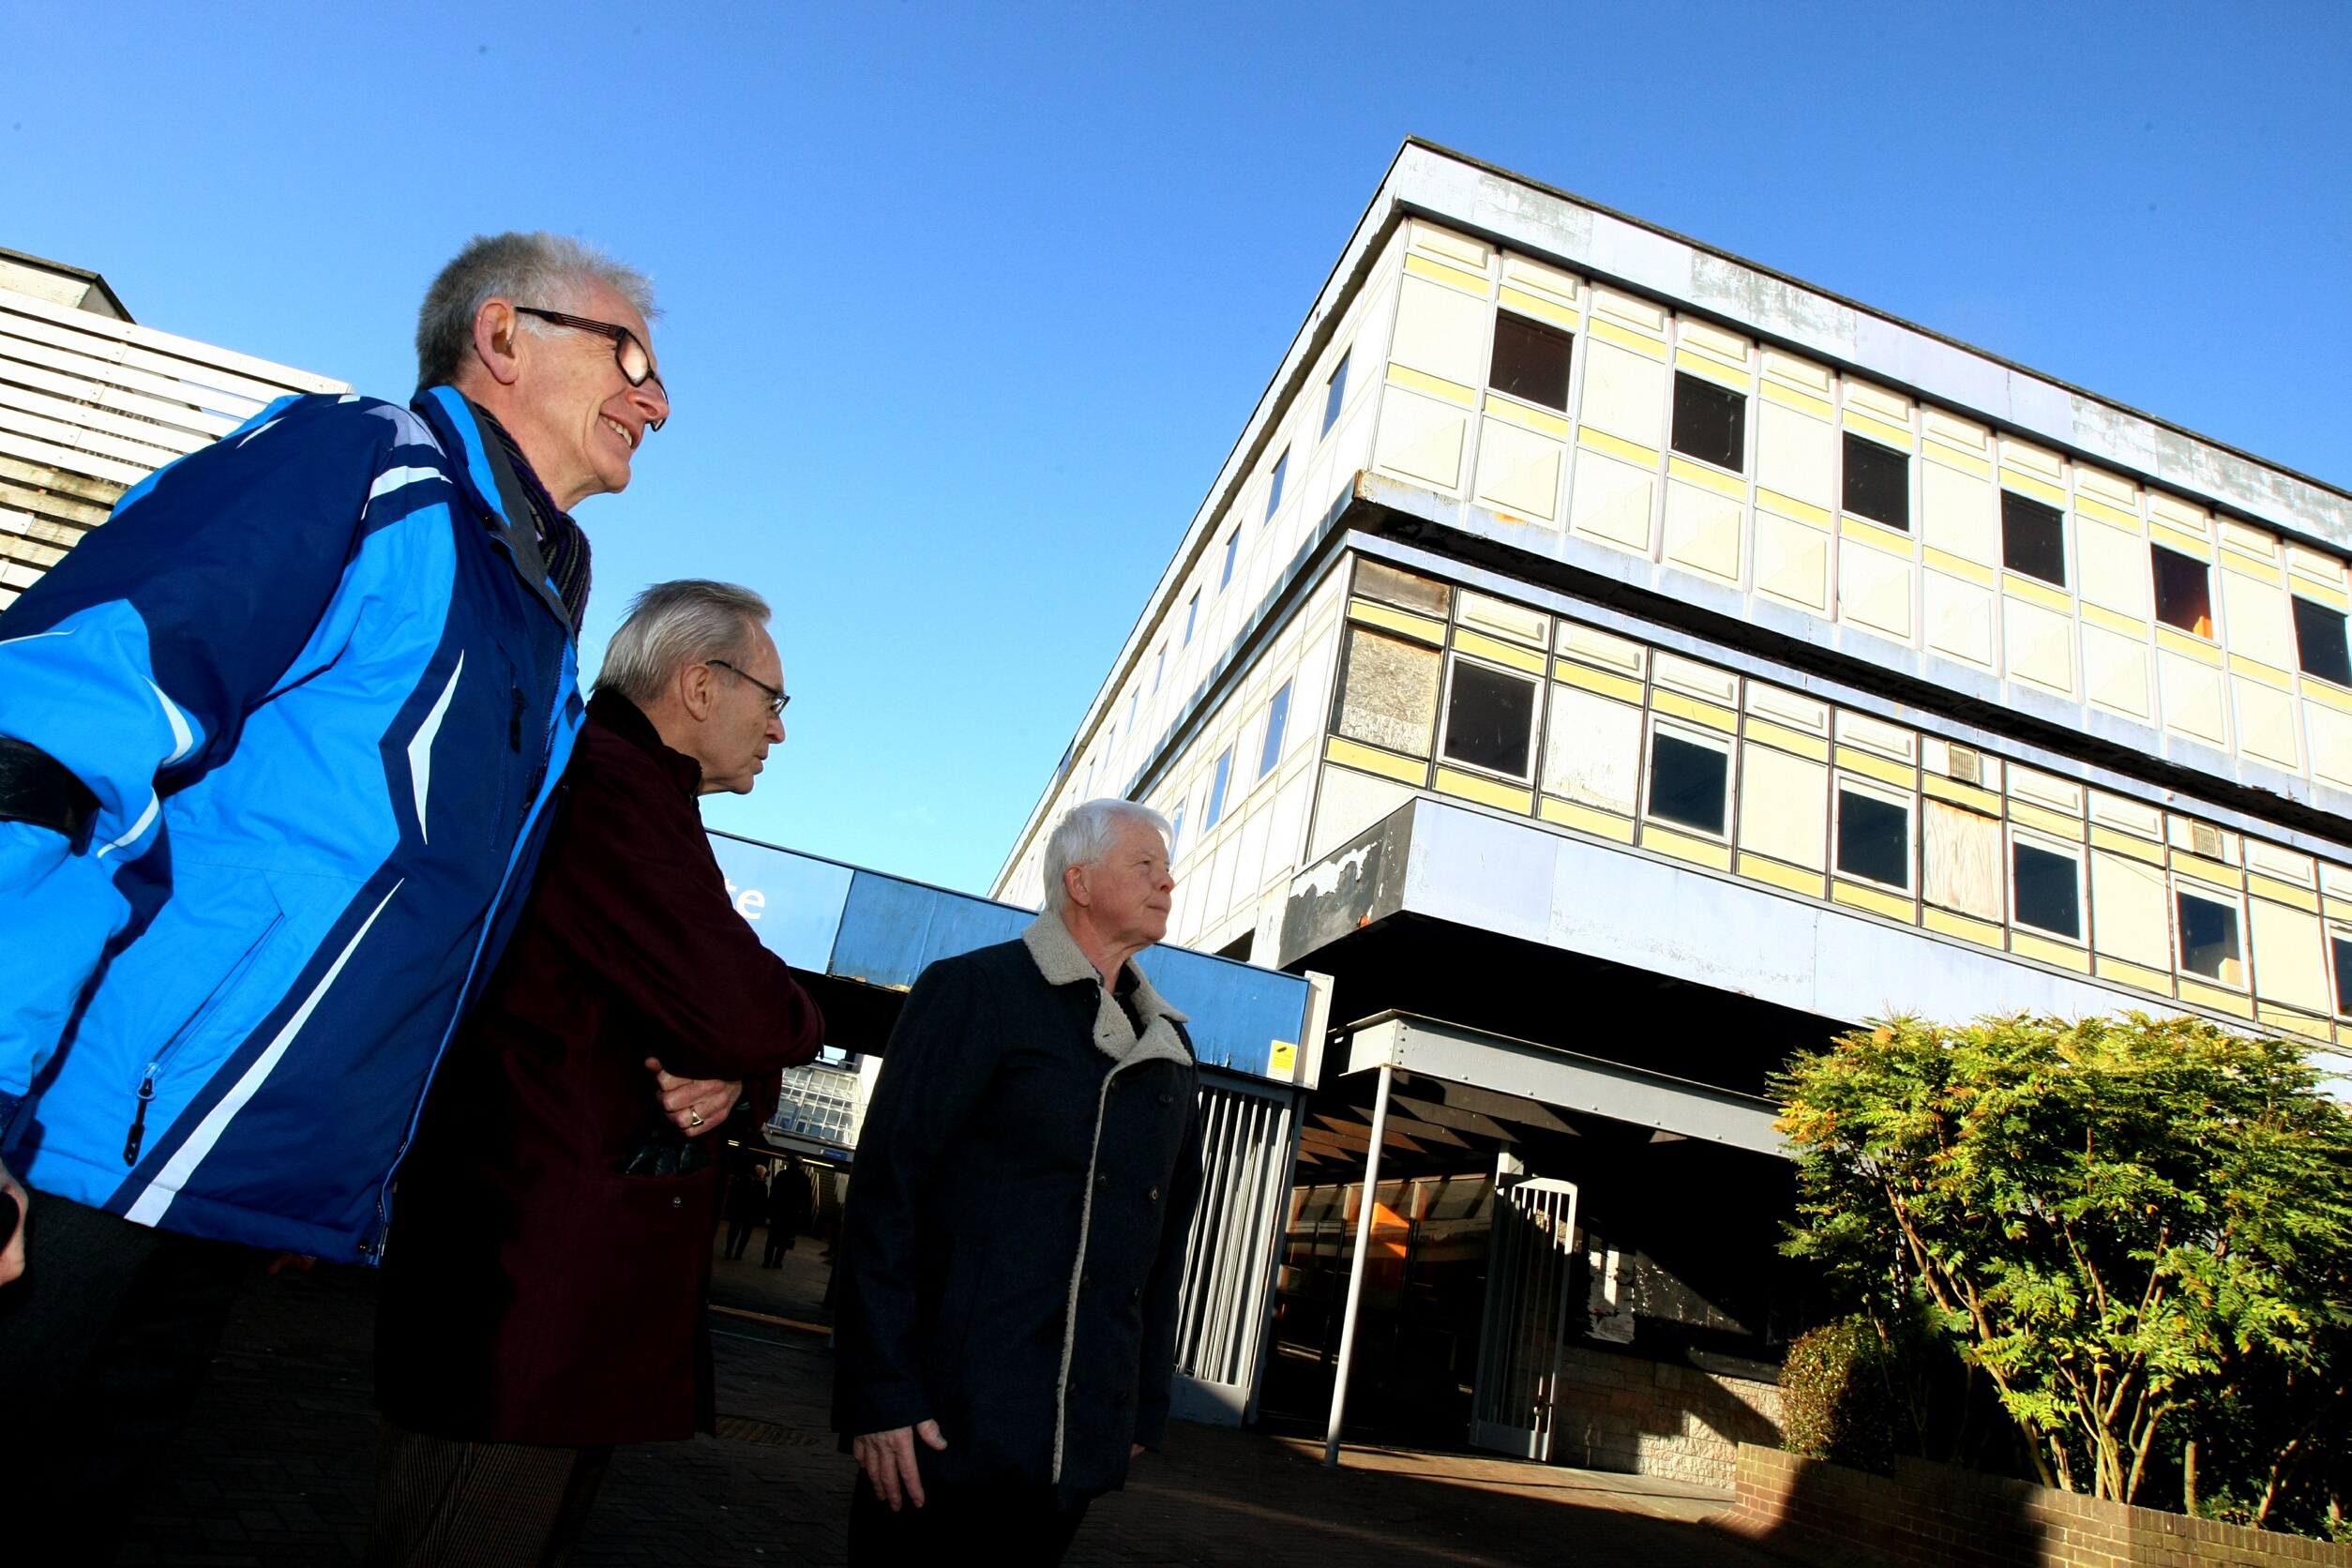 From left Bob Grant, Ron Page & David Cooper of Glenrothes Futures Group outside the former Co-op building.